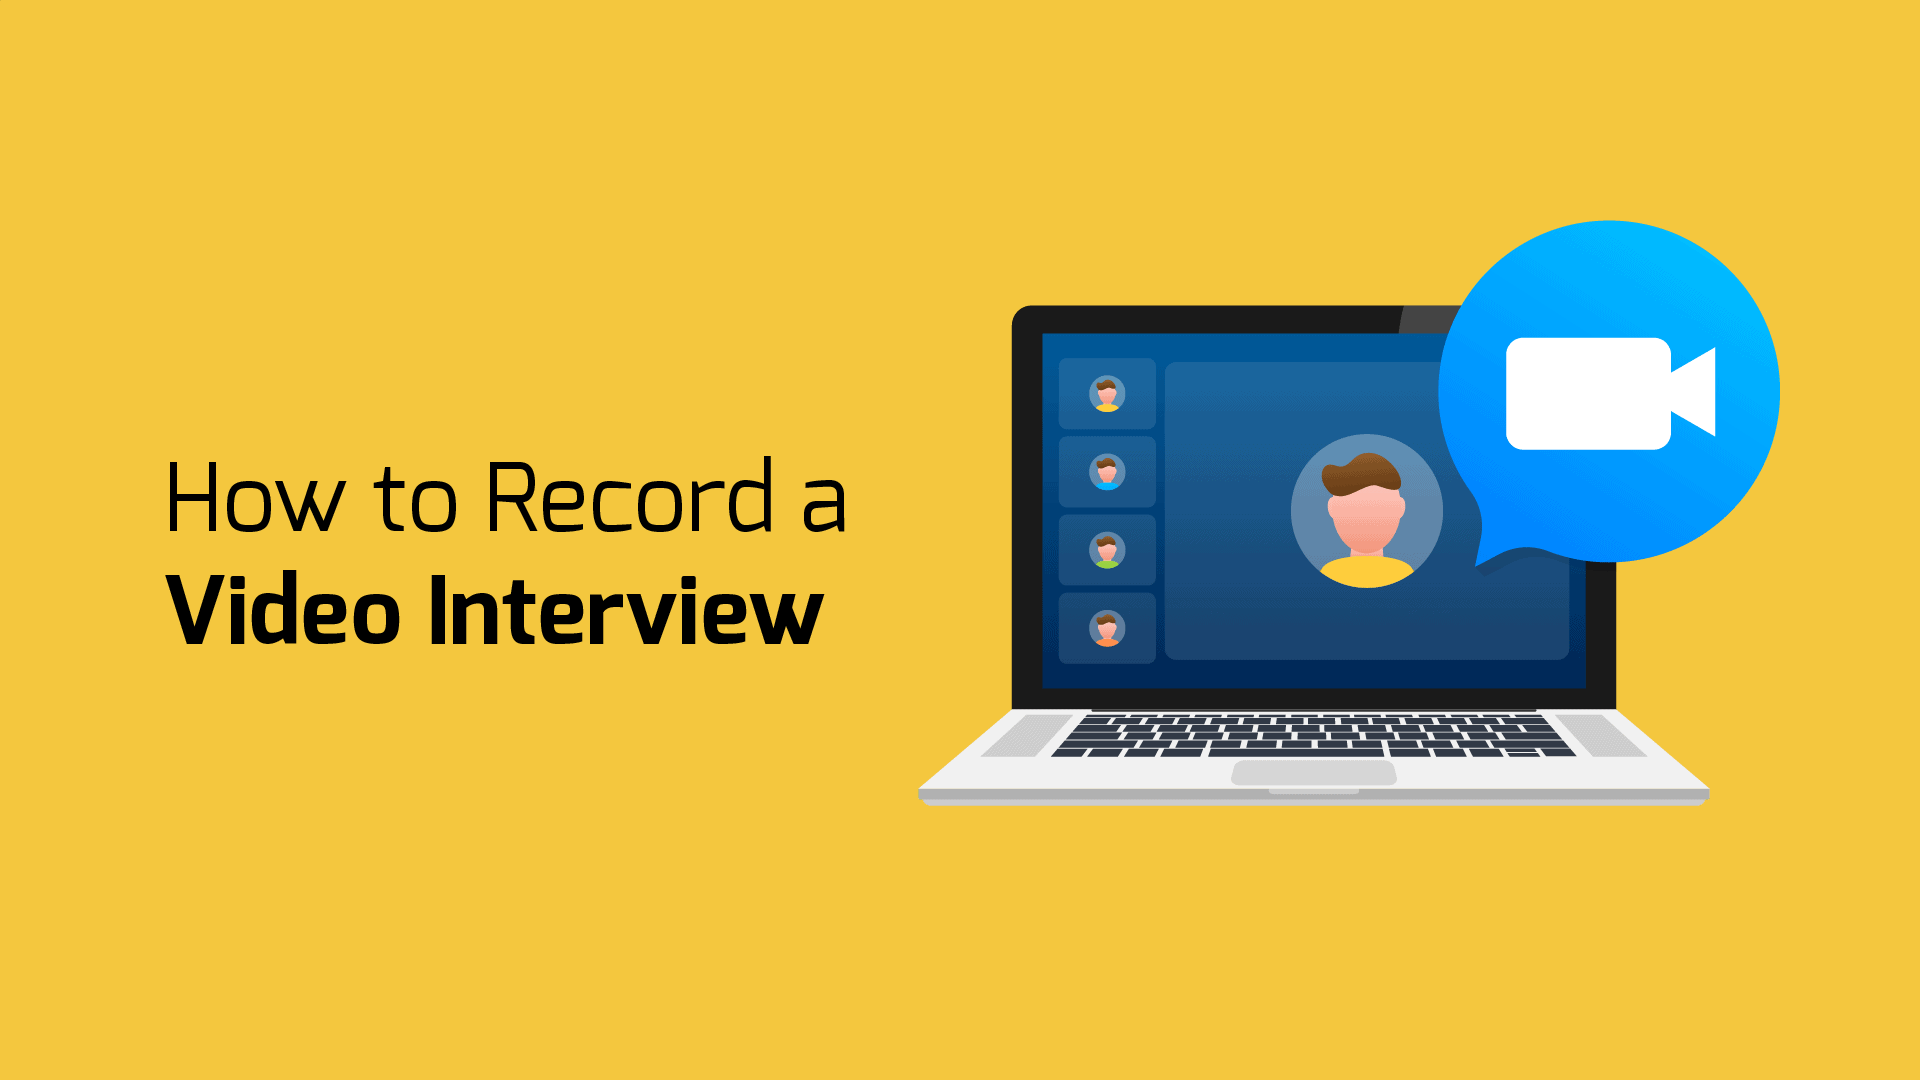 How to Record a Video Interview